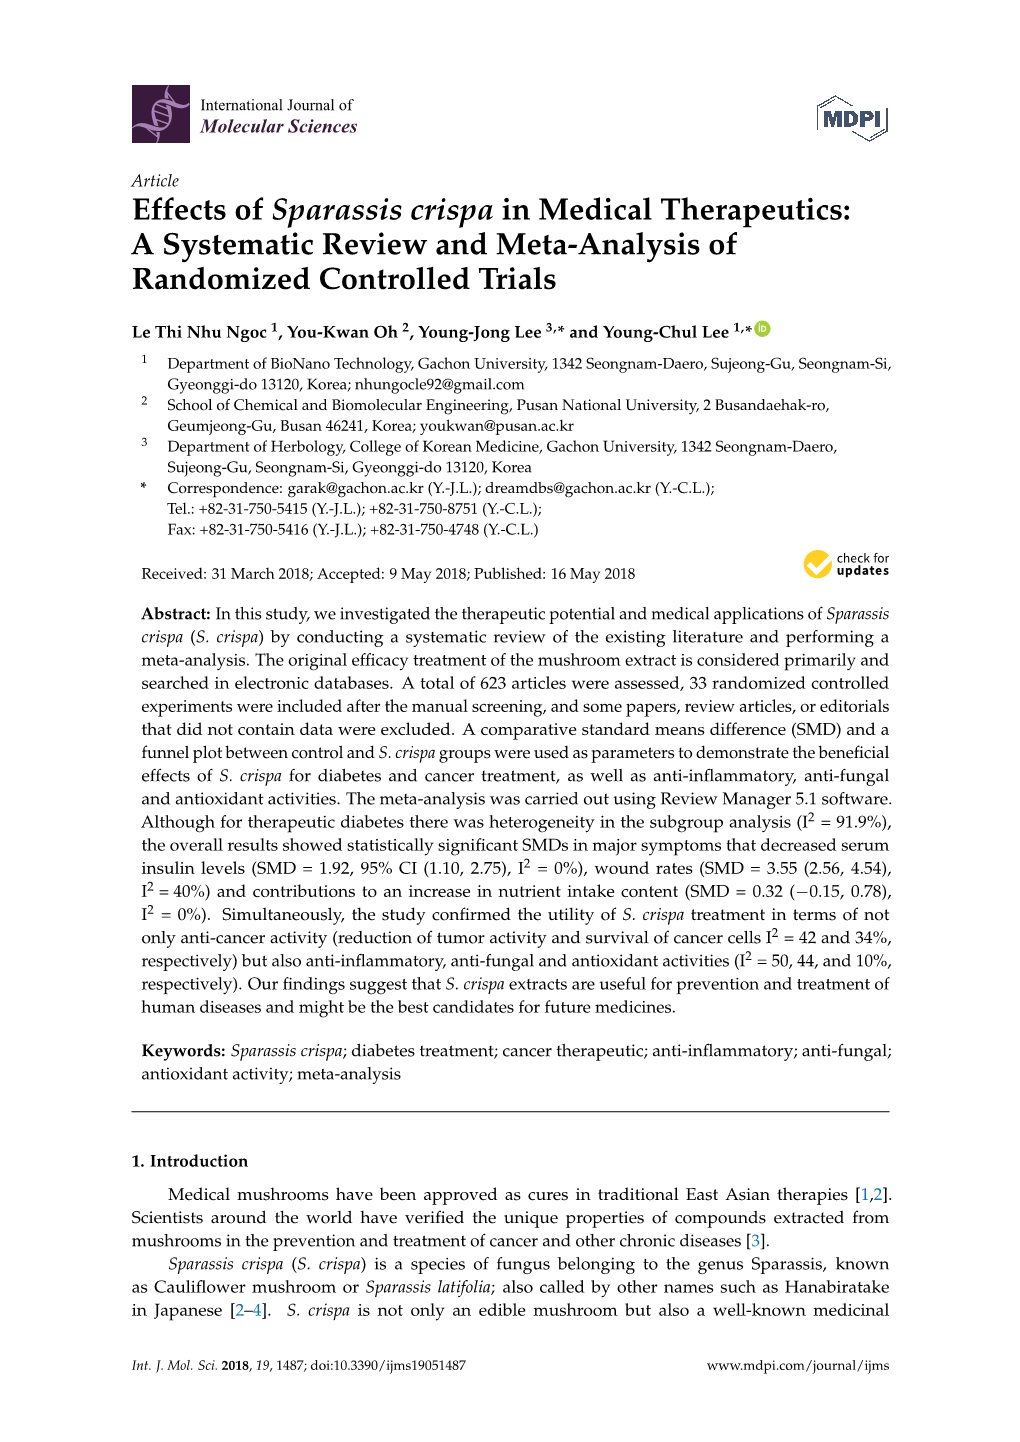 Effects of Sparassis Crispa in Medical Therapeutics: a Systematic Review and Meta-Analysis of Randomized Controlled Trials